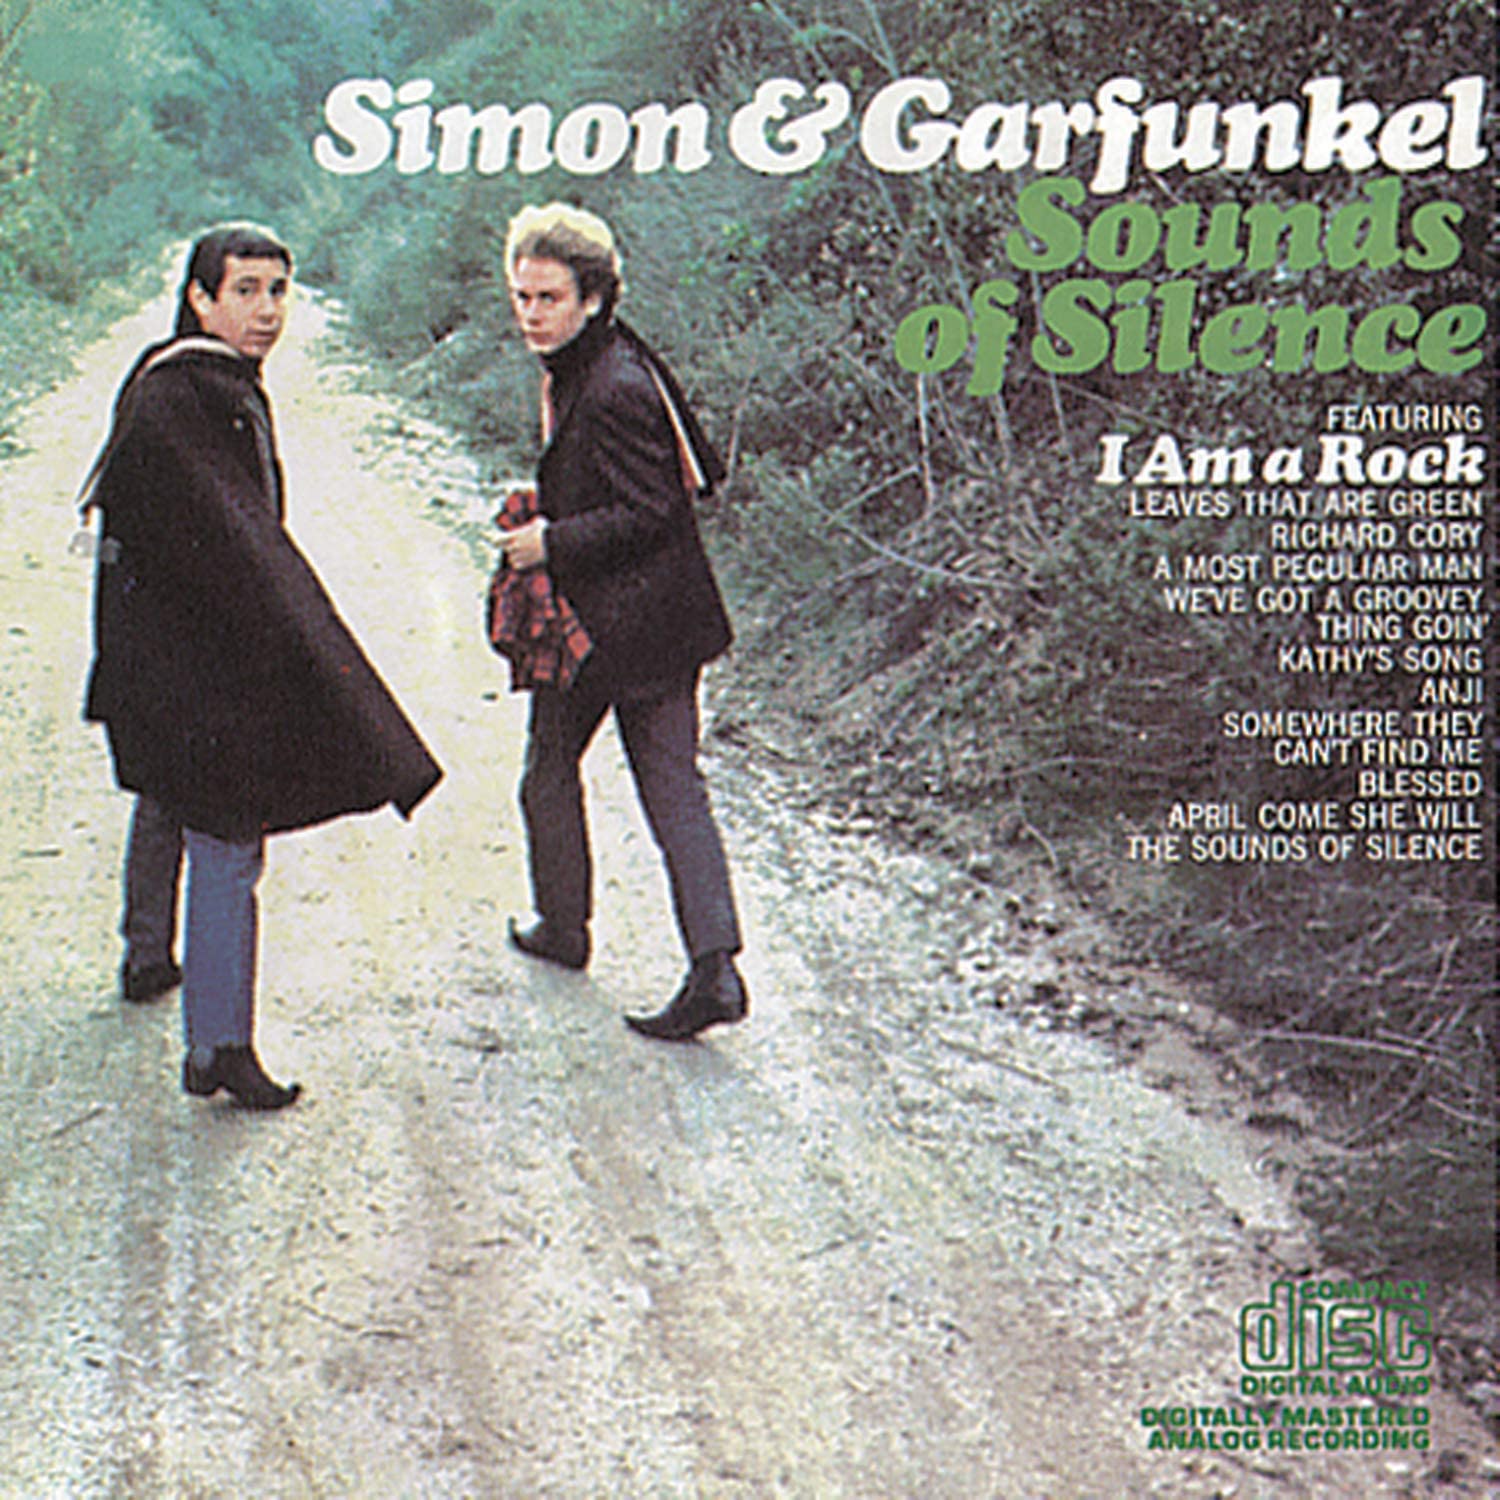 02. Sound of Silence (1966)